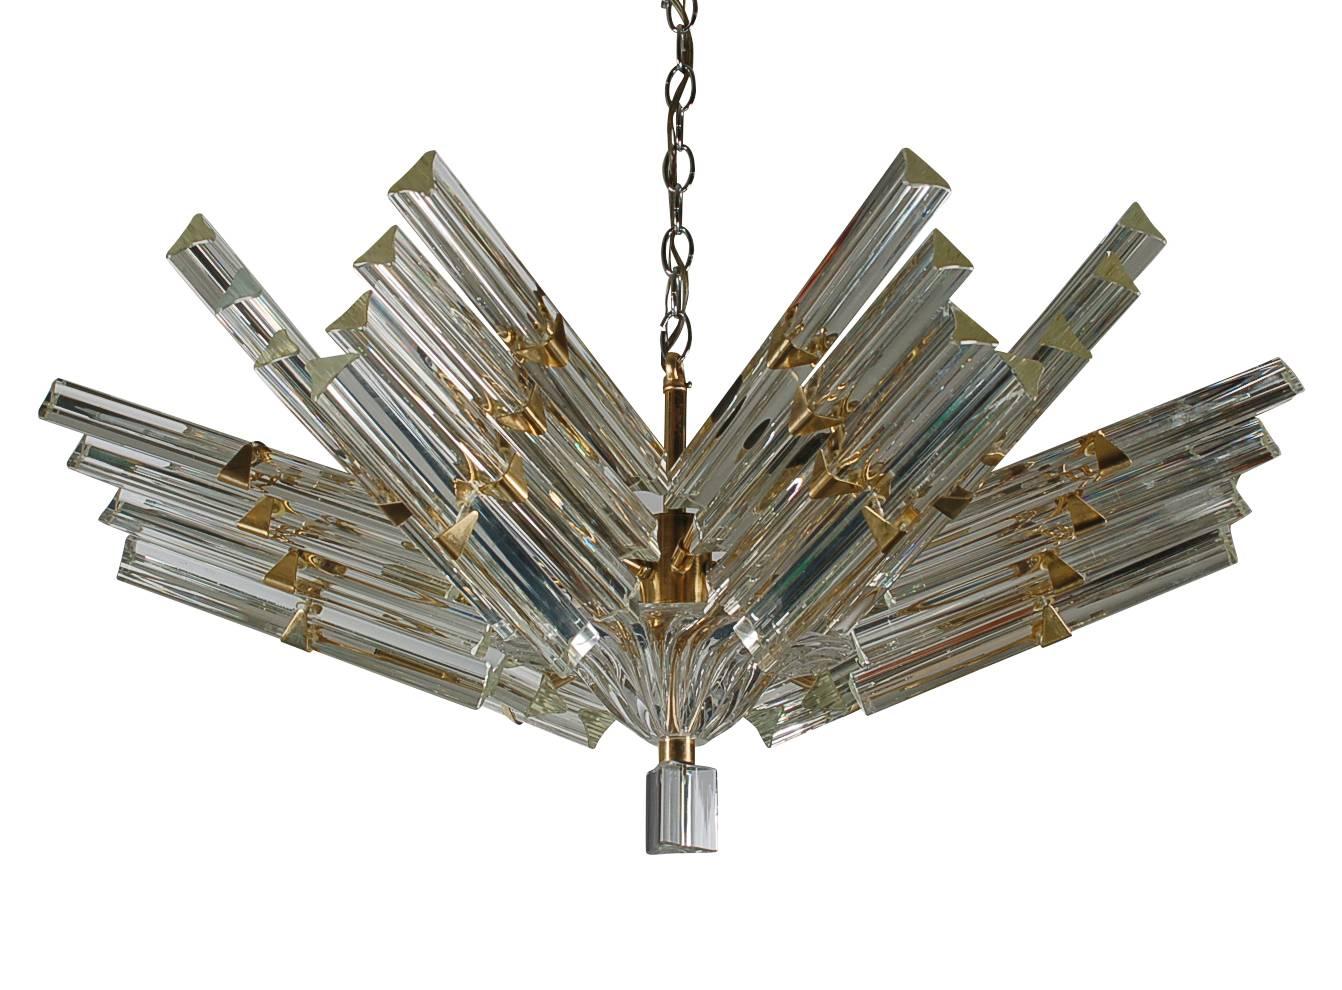 A large high quality glass and brass chandelier produced in Italy for Camer. It features a heavy brass frame with Venini Tiedri glass prisms. It takes six standard bulbs and a brass ceiling finishing plate is included and not shown.